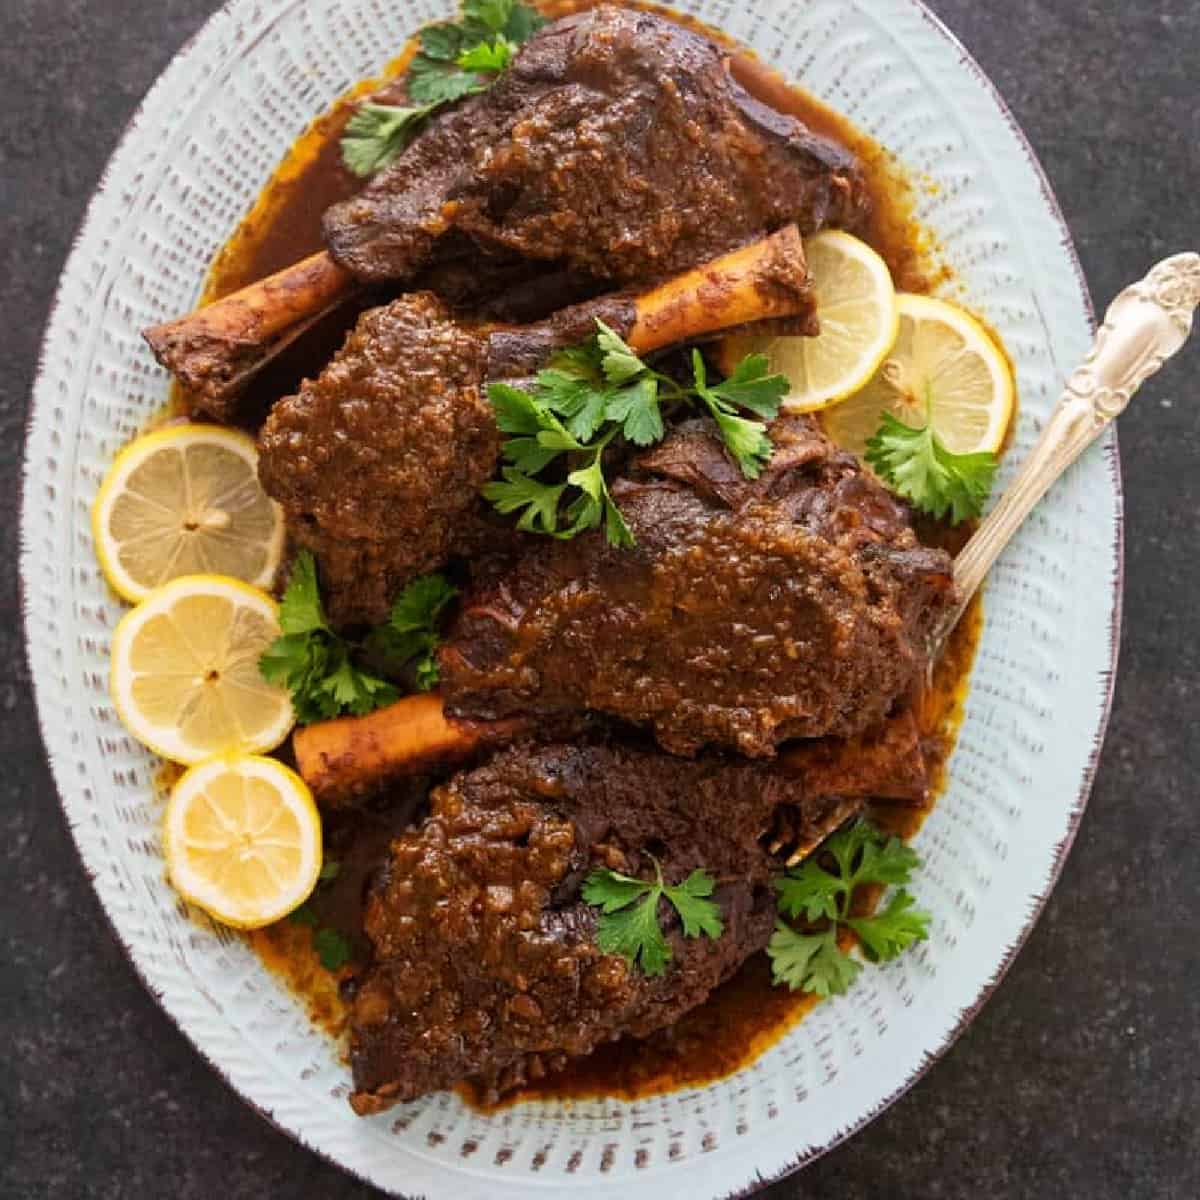 Try the best braised lamb shank recipe ever written! Lamb shanks are slow cooked in a rich spiced sauce until fall-off-the-bone-level fork tender! Serve this restaurant-quality dish with rice, potatoes or even risotto.
